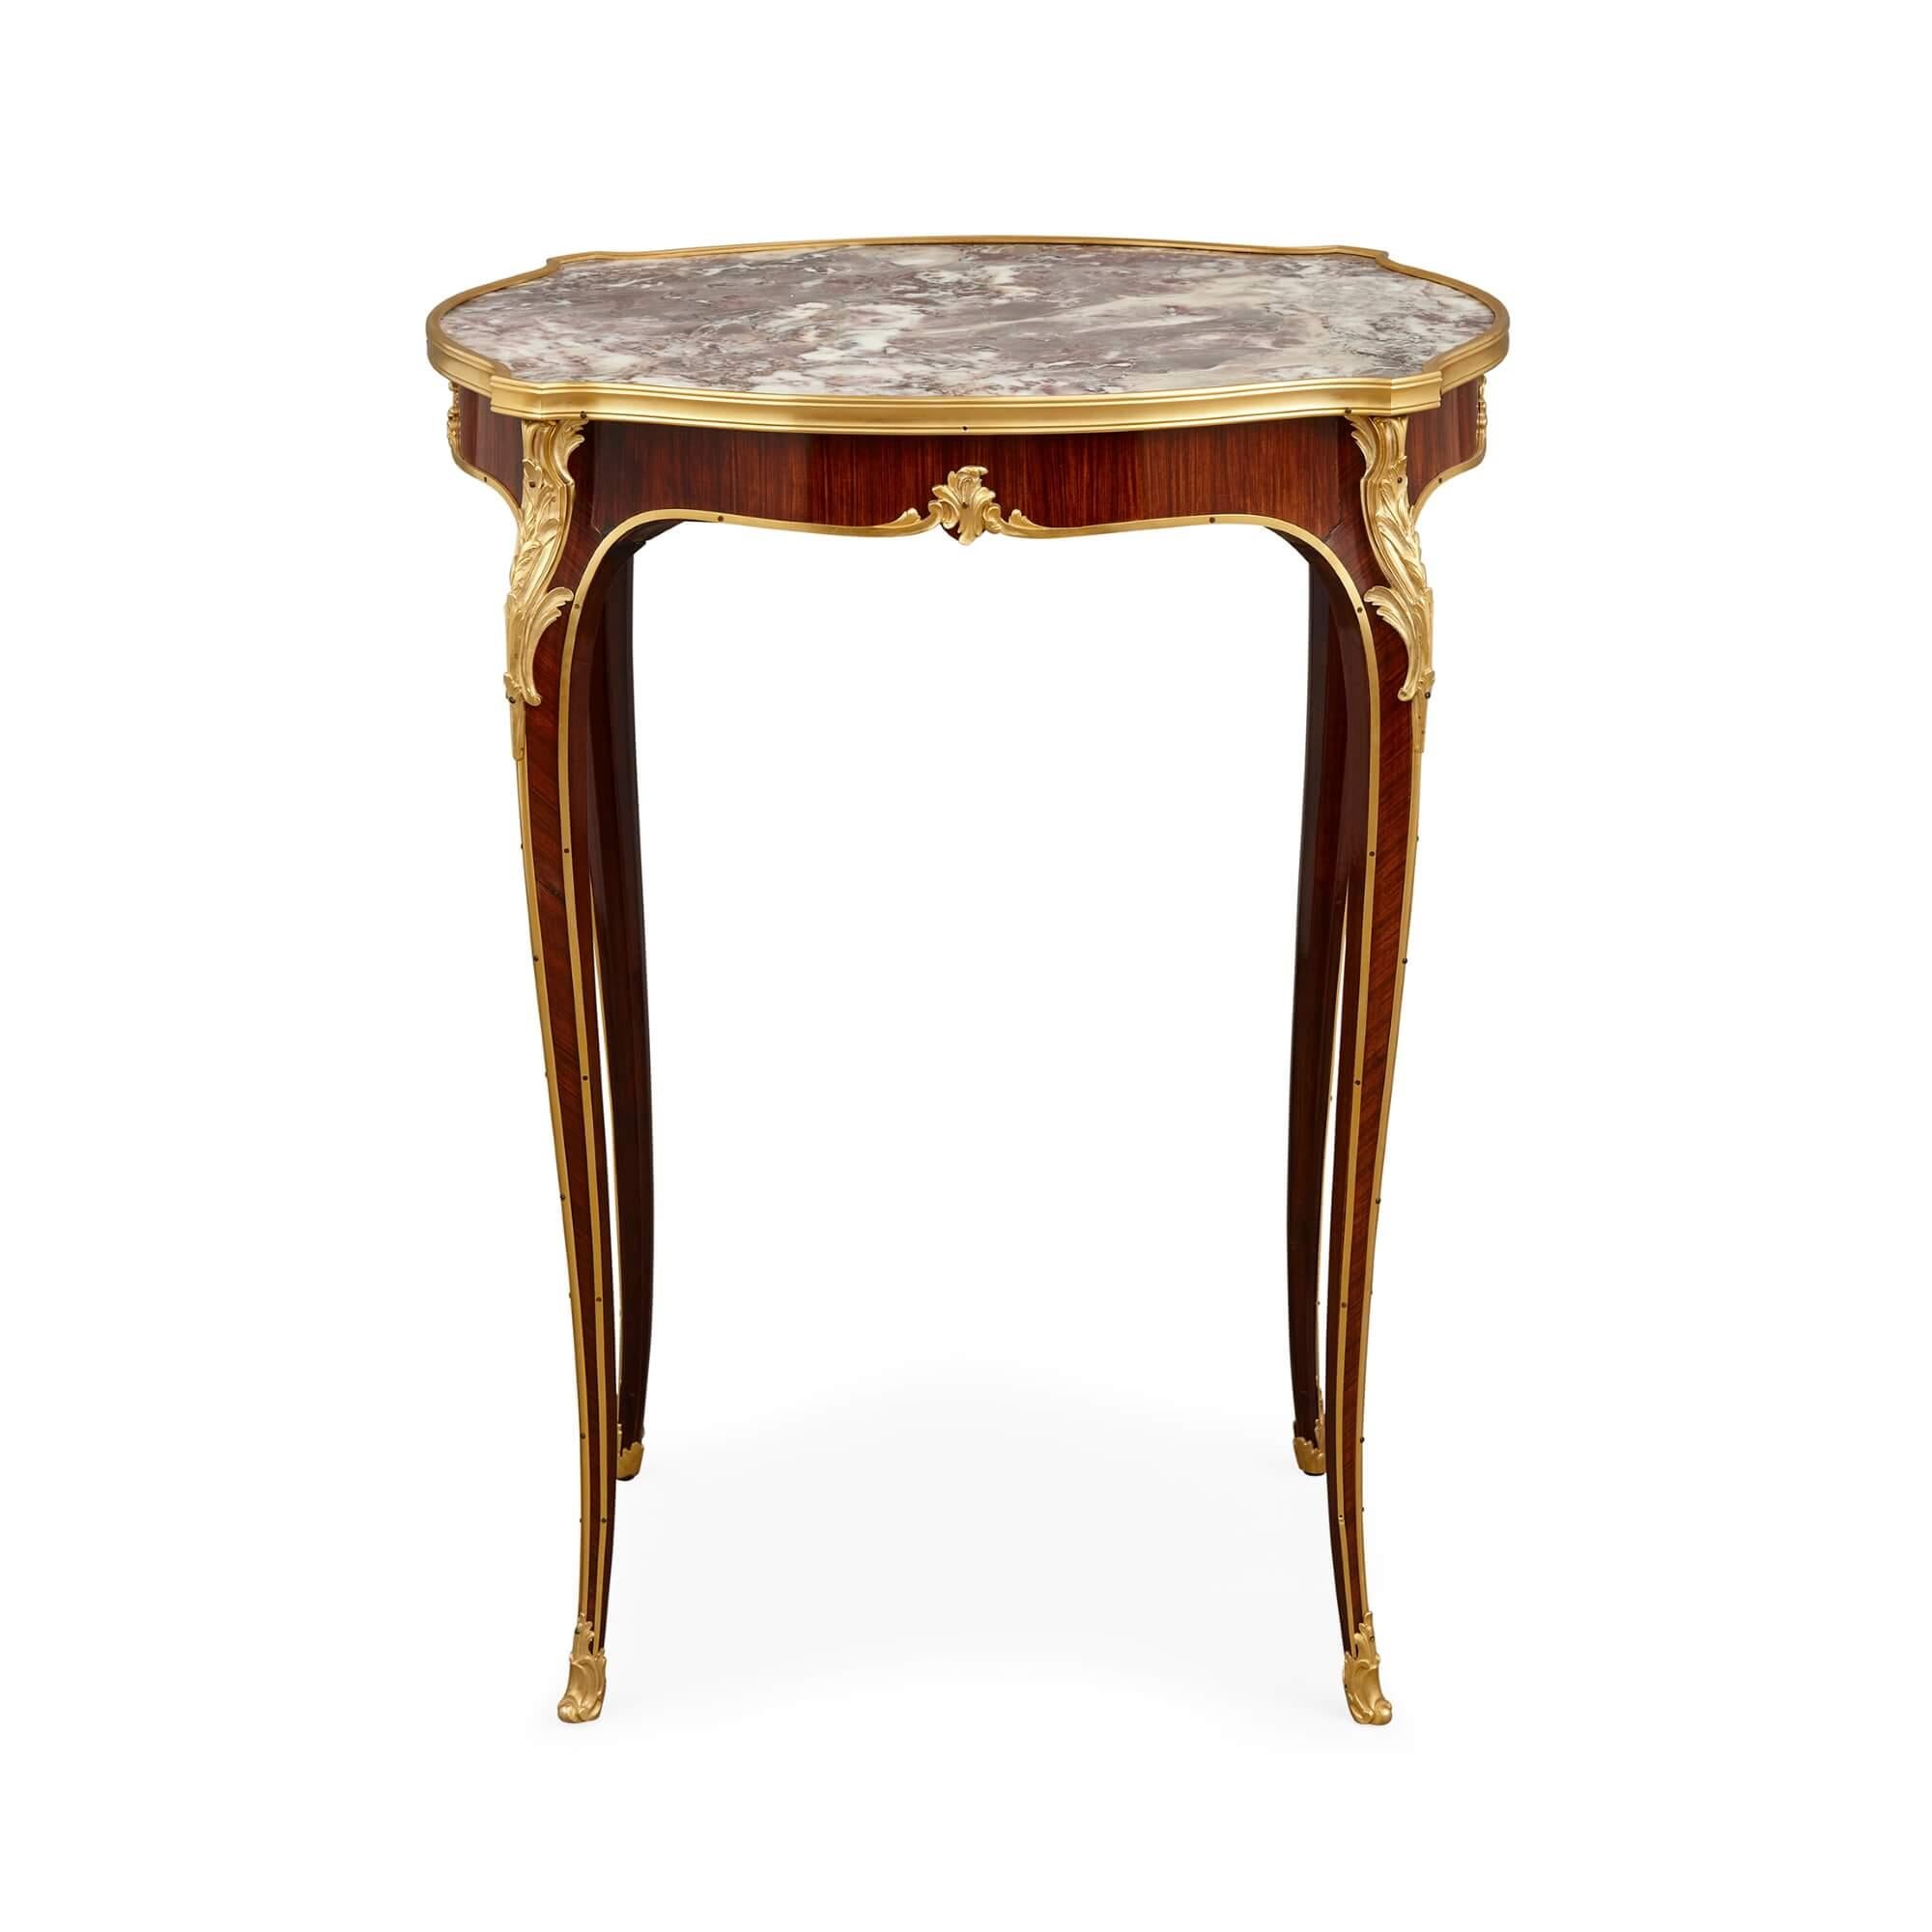 Louis XV Style Ormolu-Mounted Side Table with Marble Top Retailed by Deveraux
French, 19th Century
Height 75.5cm, width 58cm, depth 47cm

This very fine piece is an ormolu-mounted, marble inlaid side-table, retailed by Deveraux of Paris, and made in